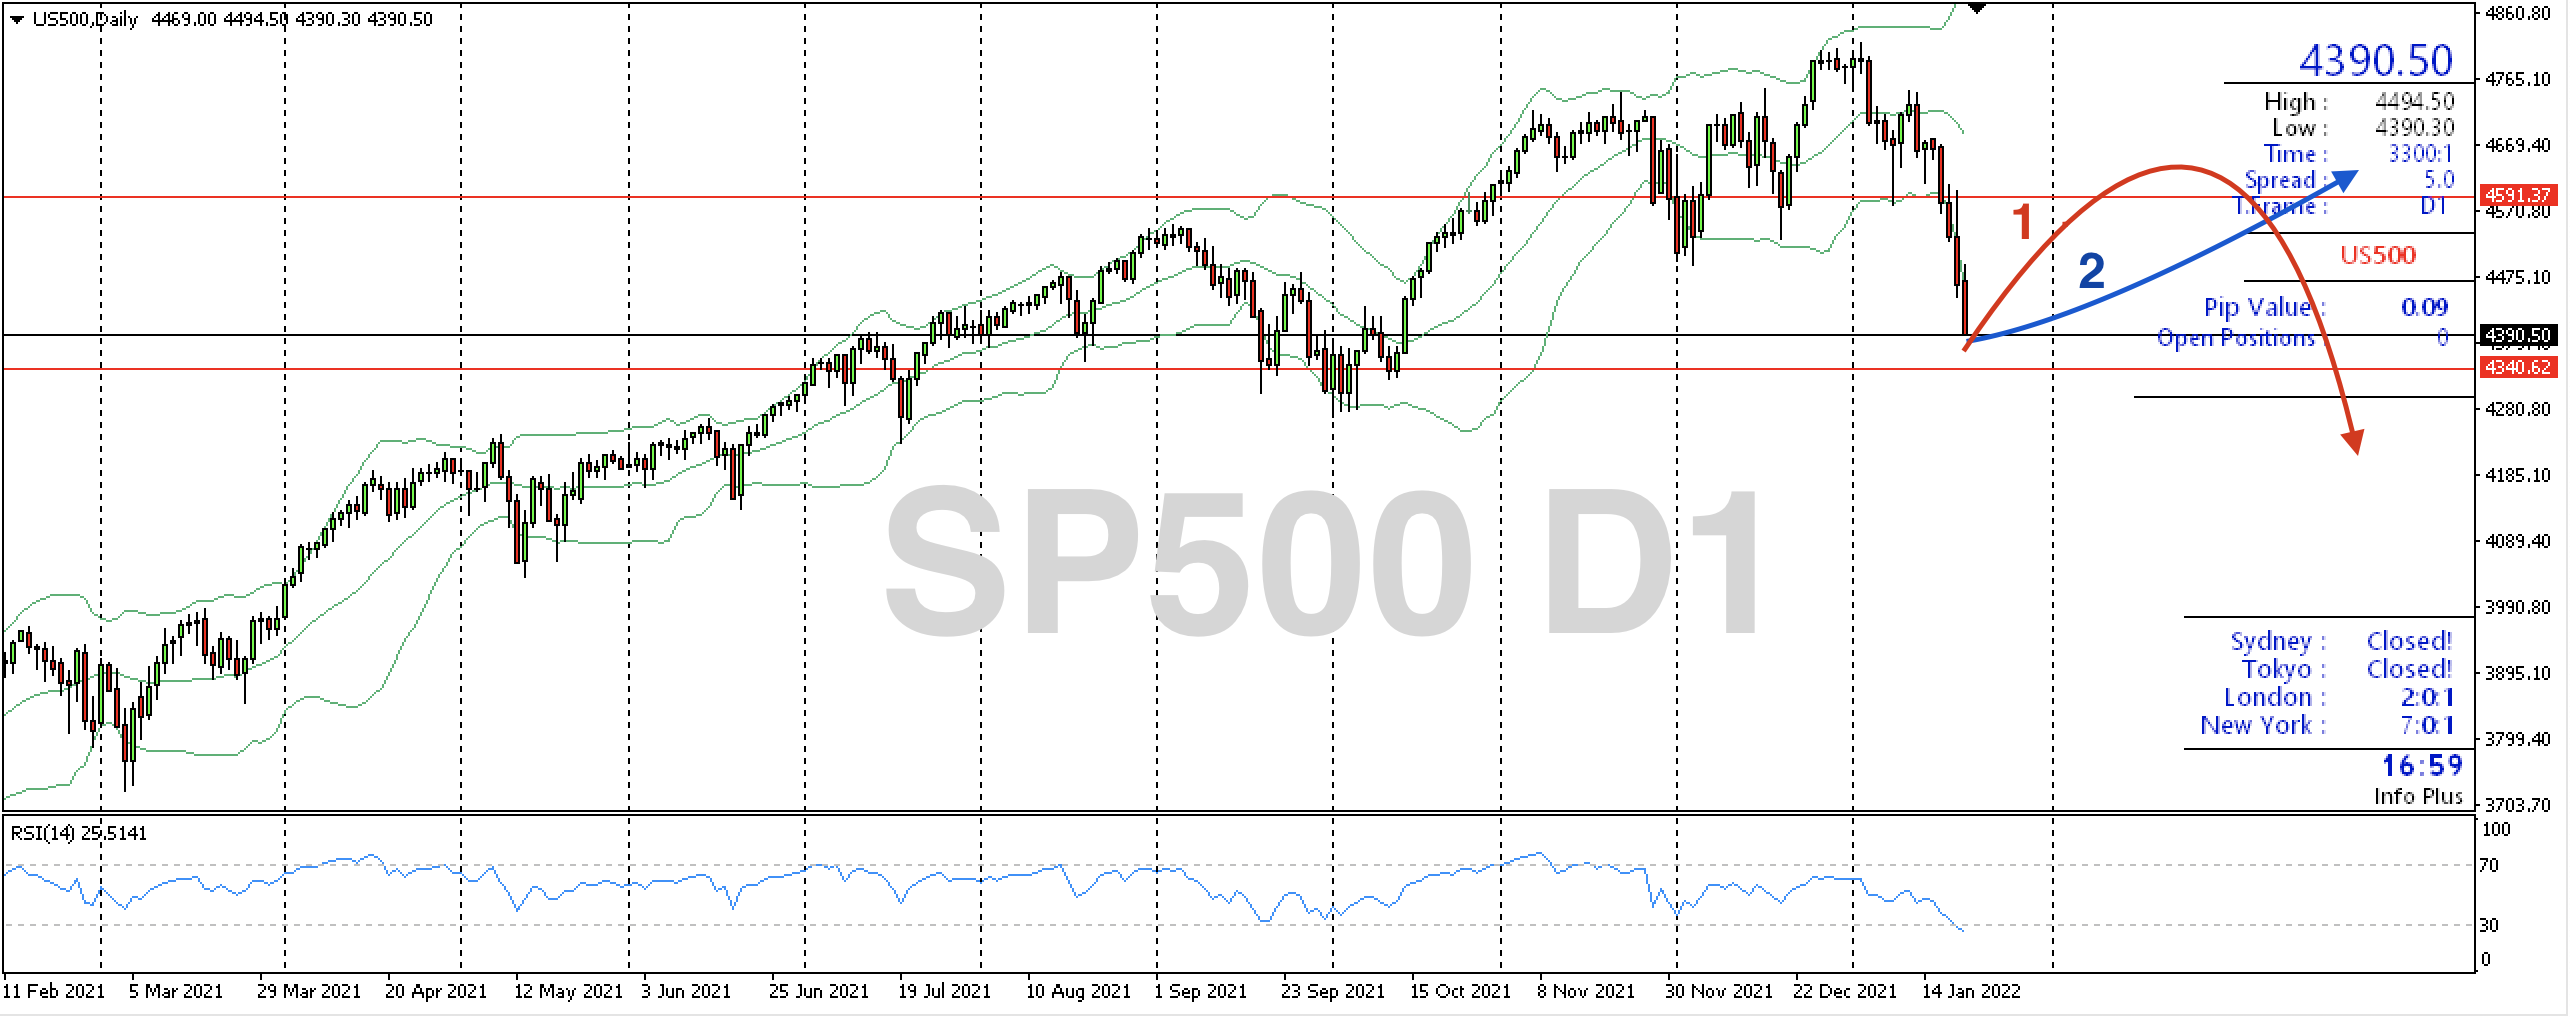 sp500 technical rebound possible